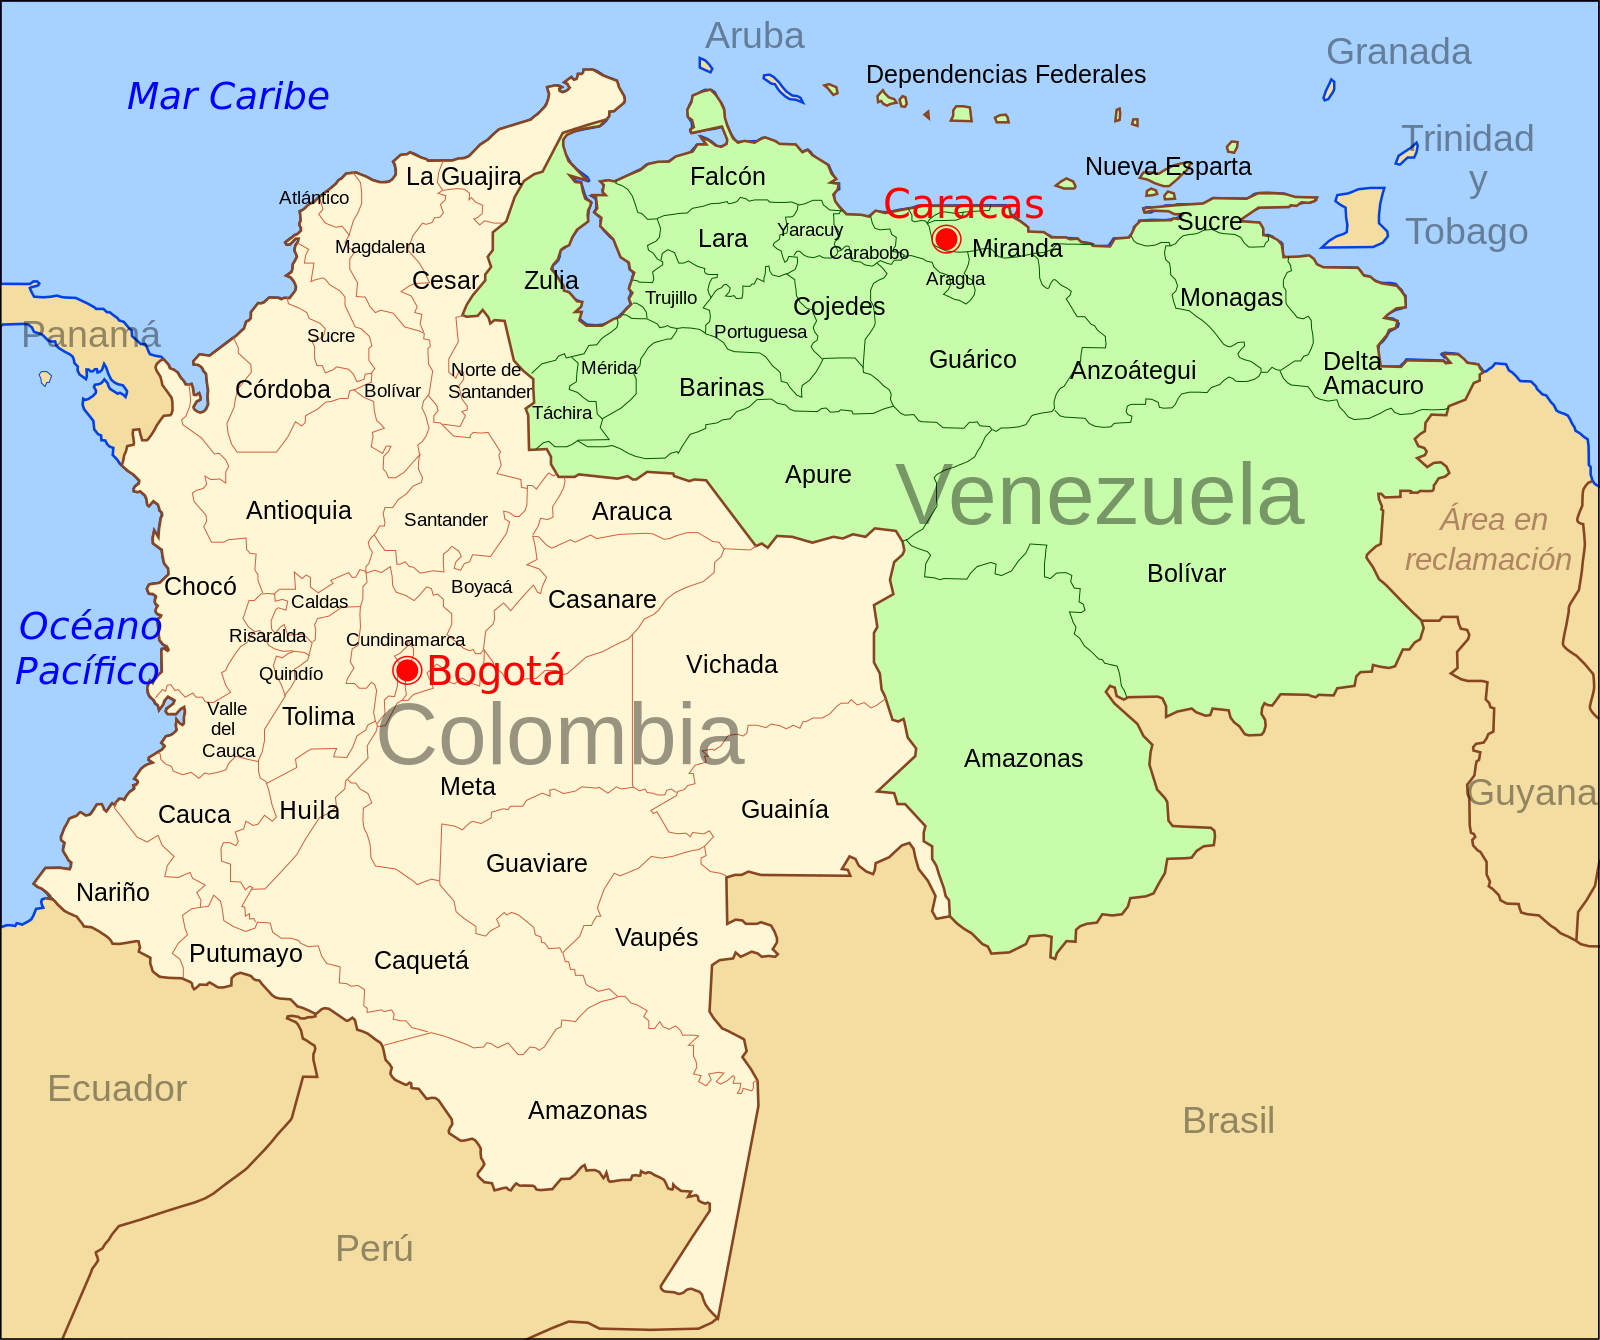 Venezuela and Colombia will reestablish diplomatic relations. (Photo internet reproduction)